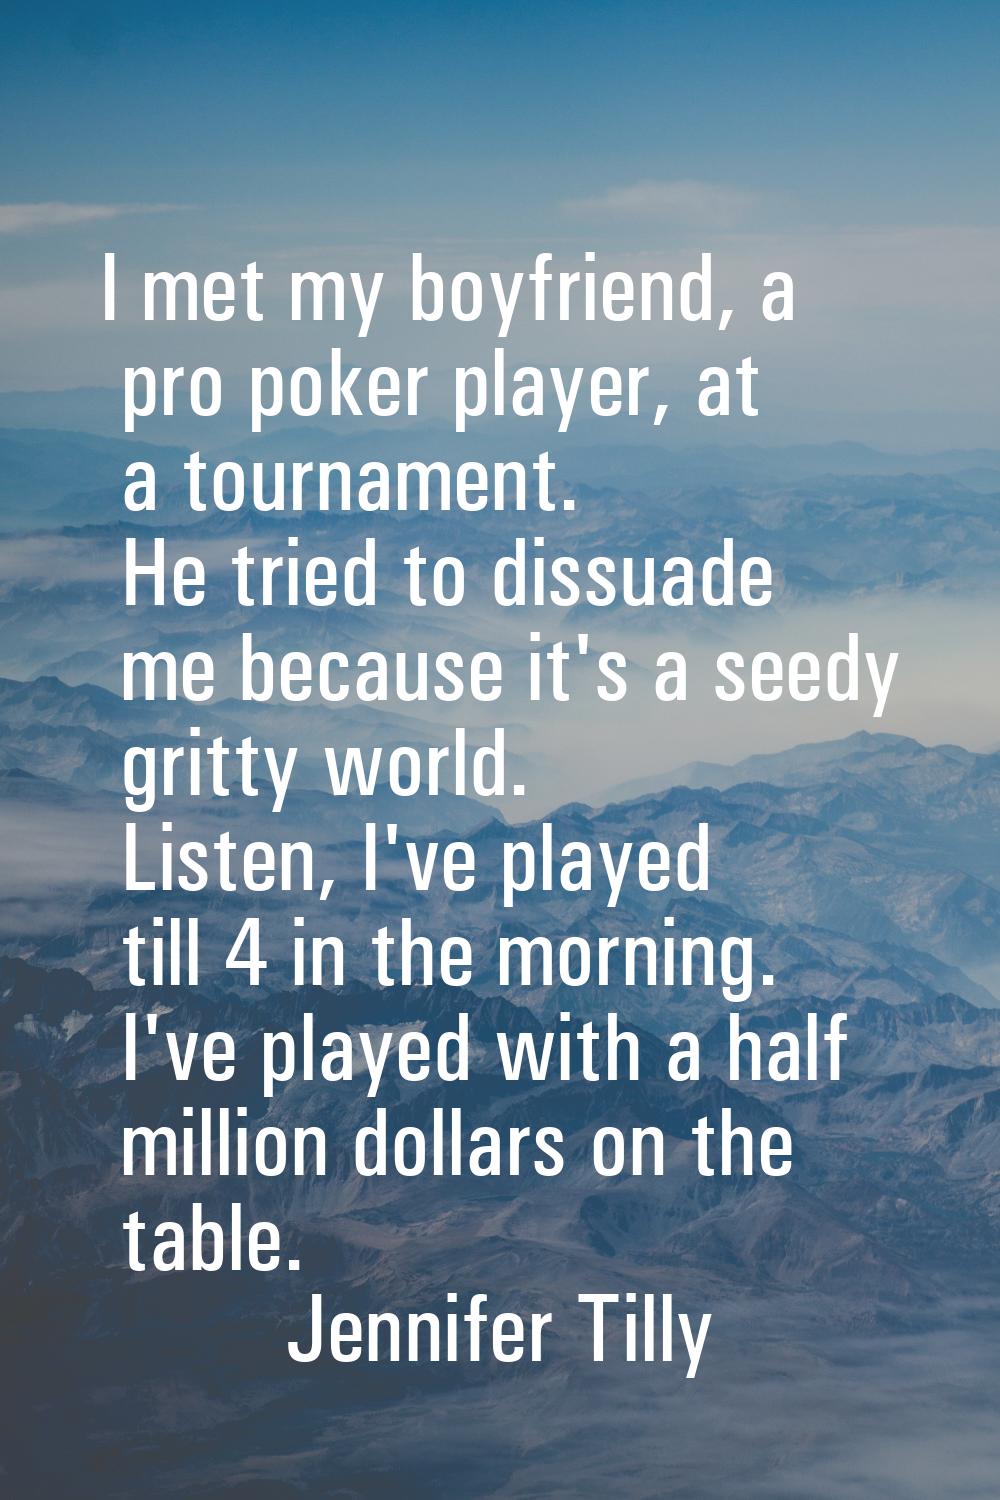 I met my boyfriend, a pro poker player, at a tournament. He tried to dissuade me because it's a see